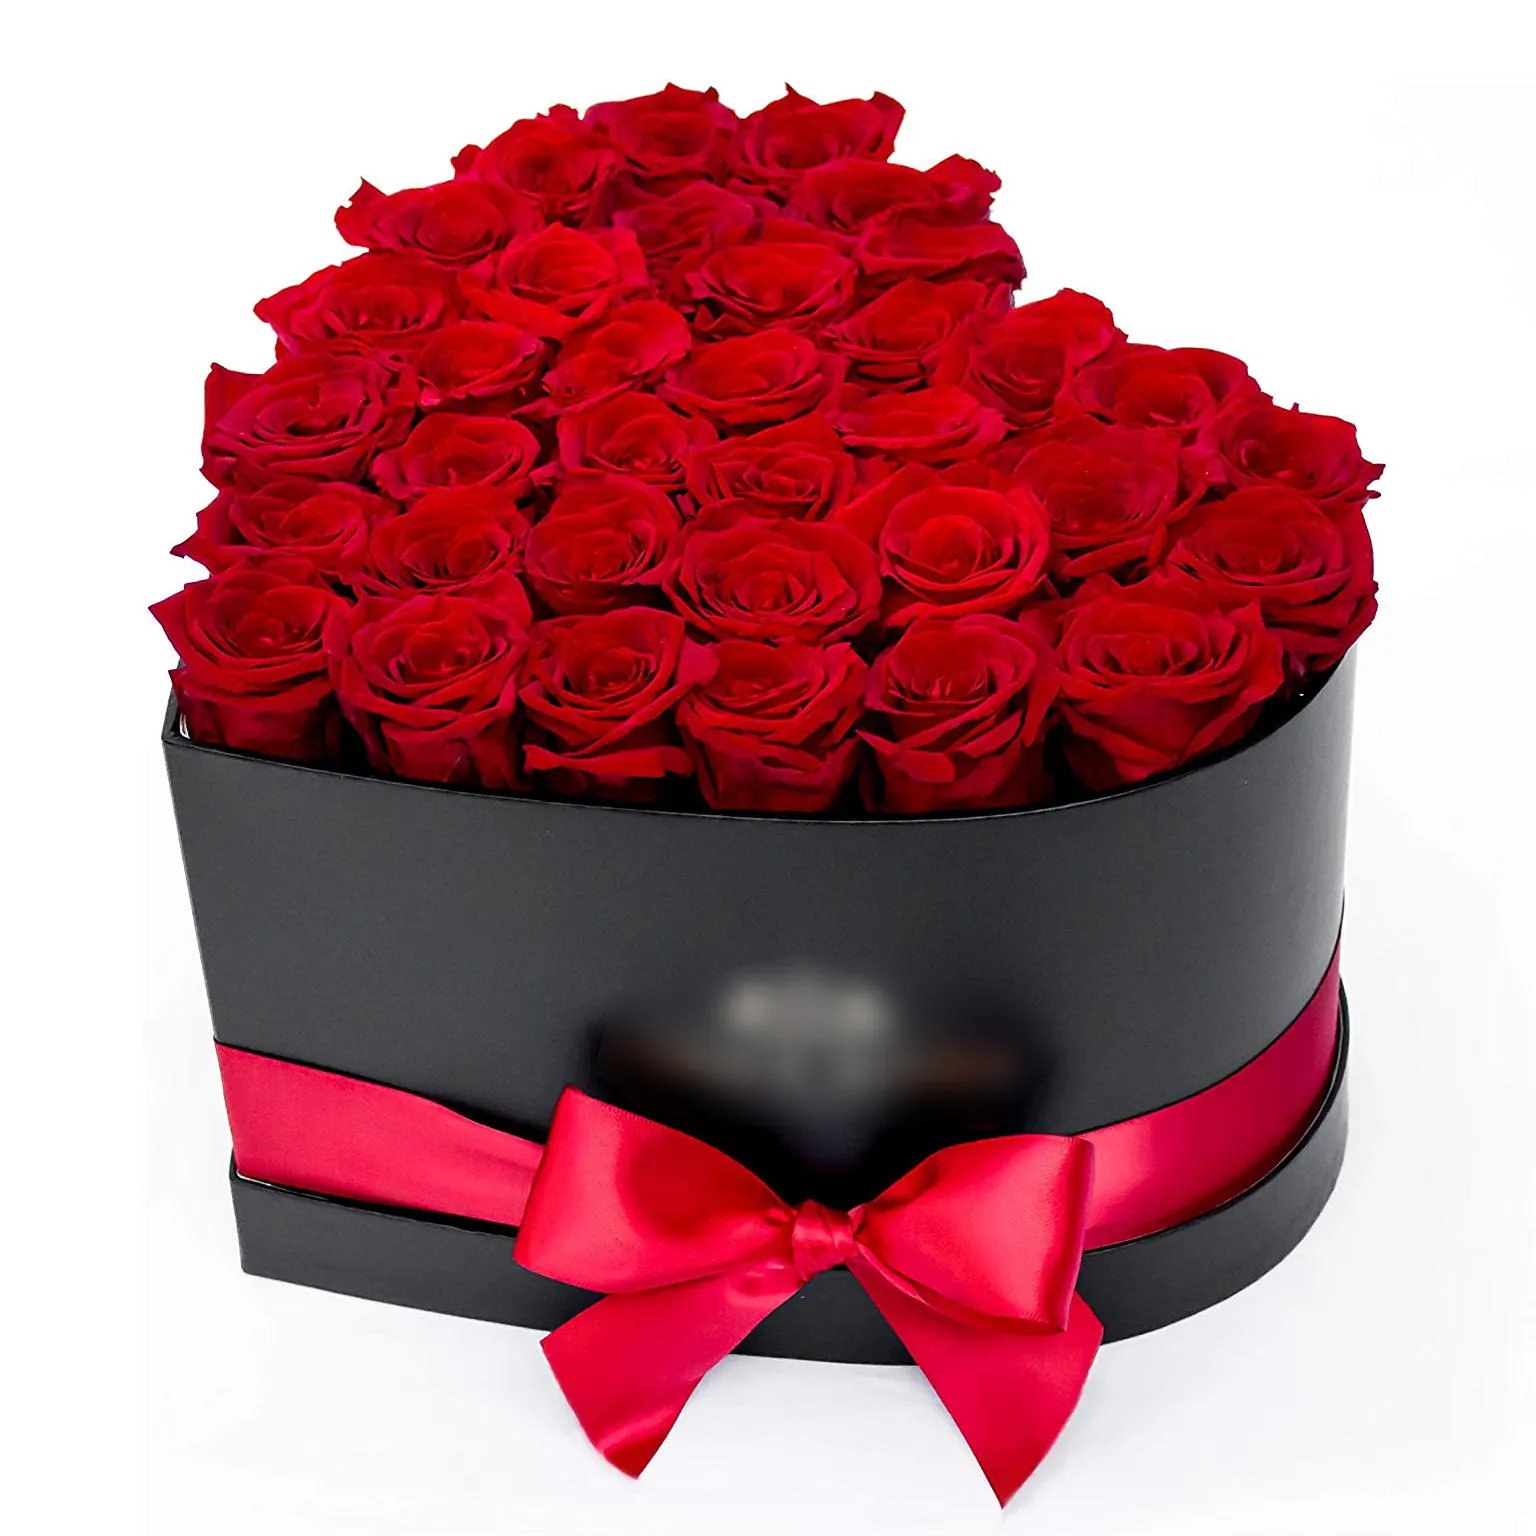 2020 best selling products beautiful eternal rose preserved roses in gift box